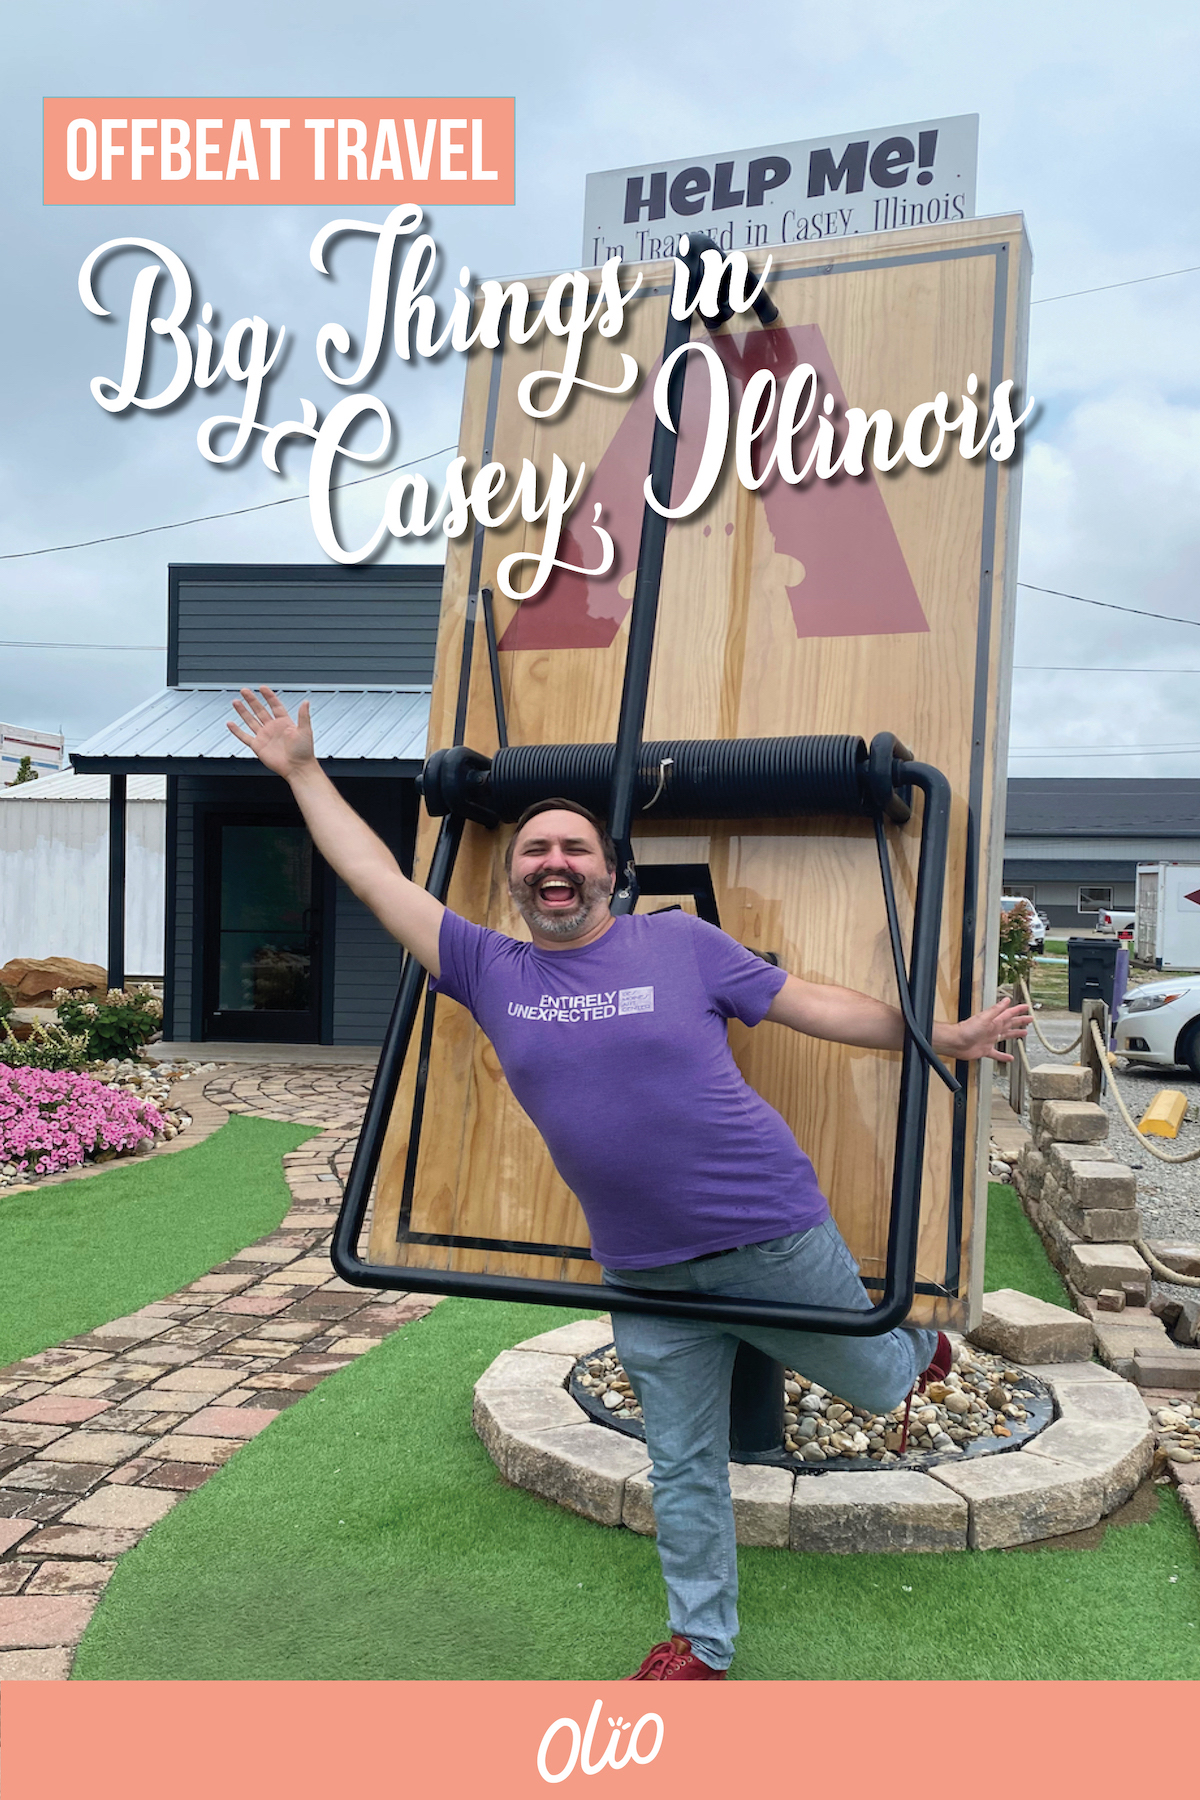 Looking for a big adventure? Head to Casey, Illinois! Not only is this small town is home to 12 Guinness World Records, but there are a lot of other big attractions in Casey, Illinois as well. From functional toys and fun photo ops to tributes to local business owners, this town has truly supersized its commitment to the wacky and whimsical. The next time you visit, be sure to check out these 24 big attractions in Casey, Illinois.